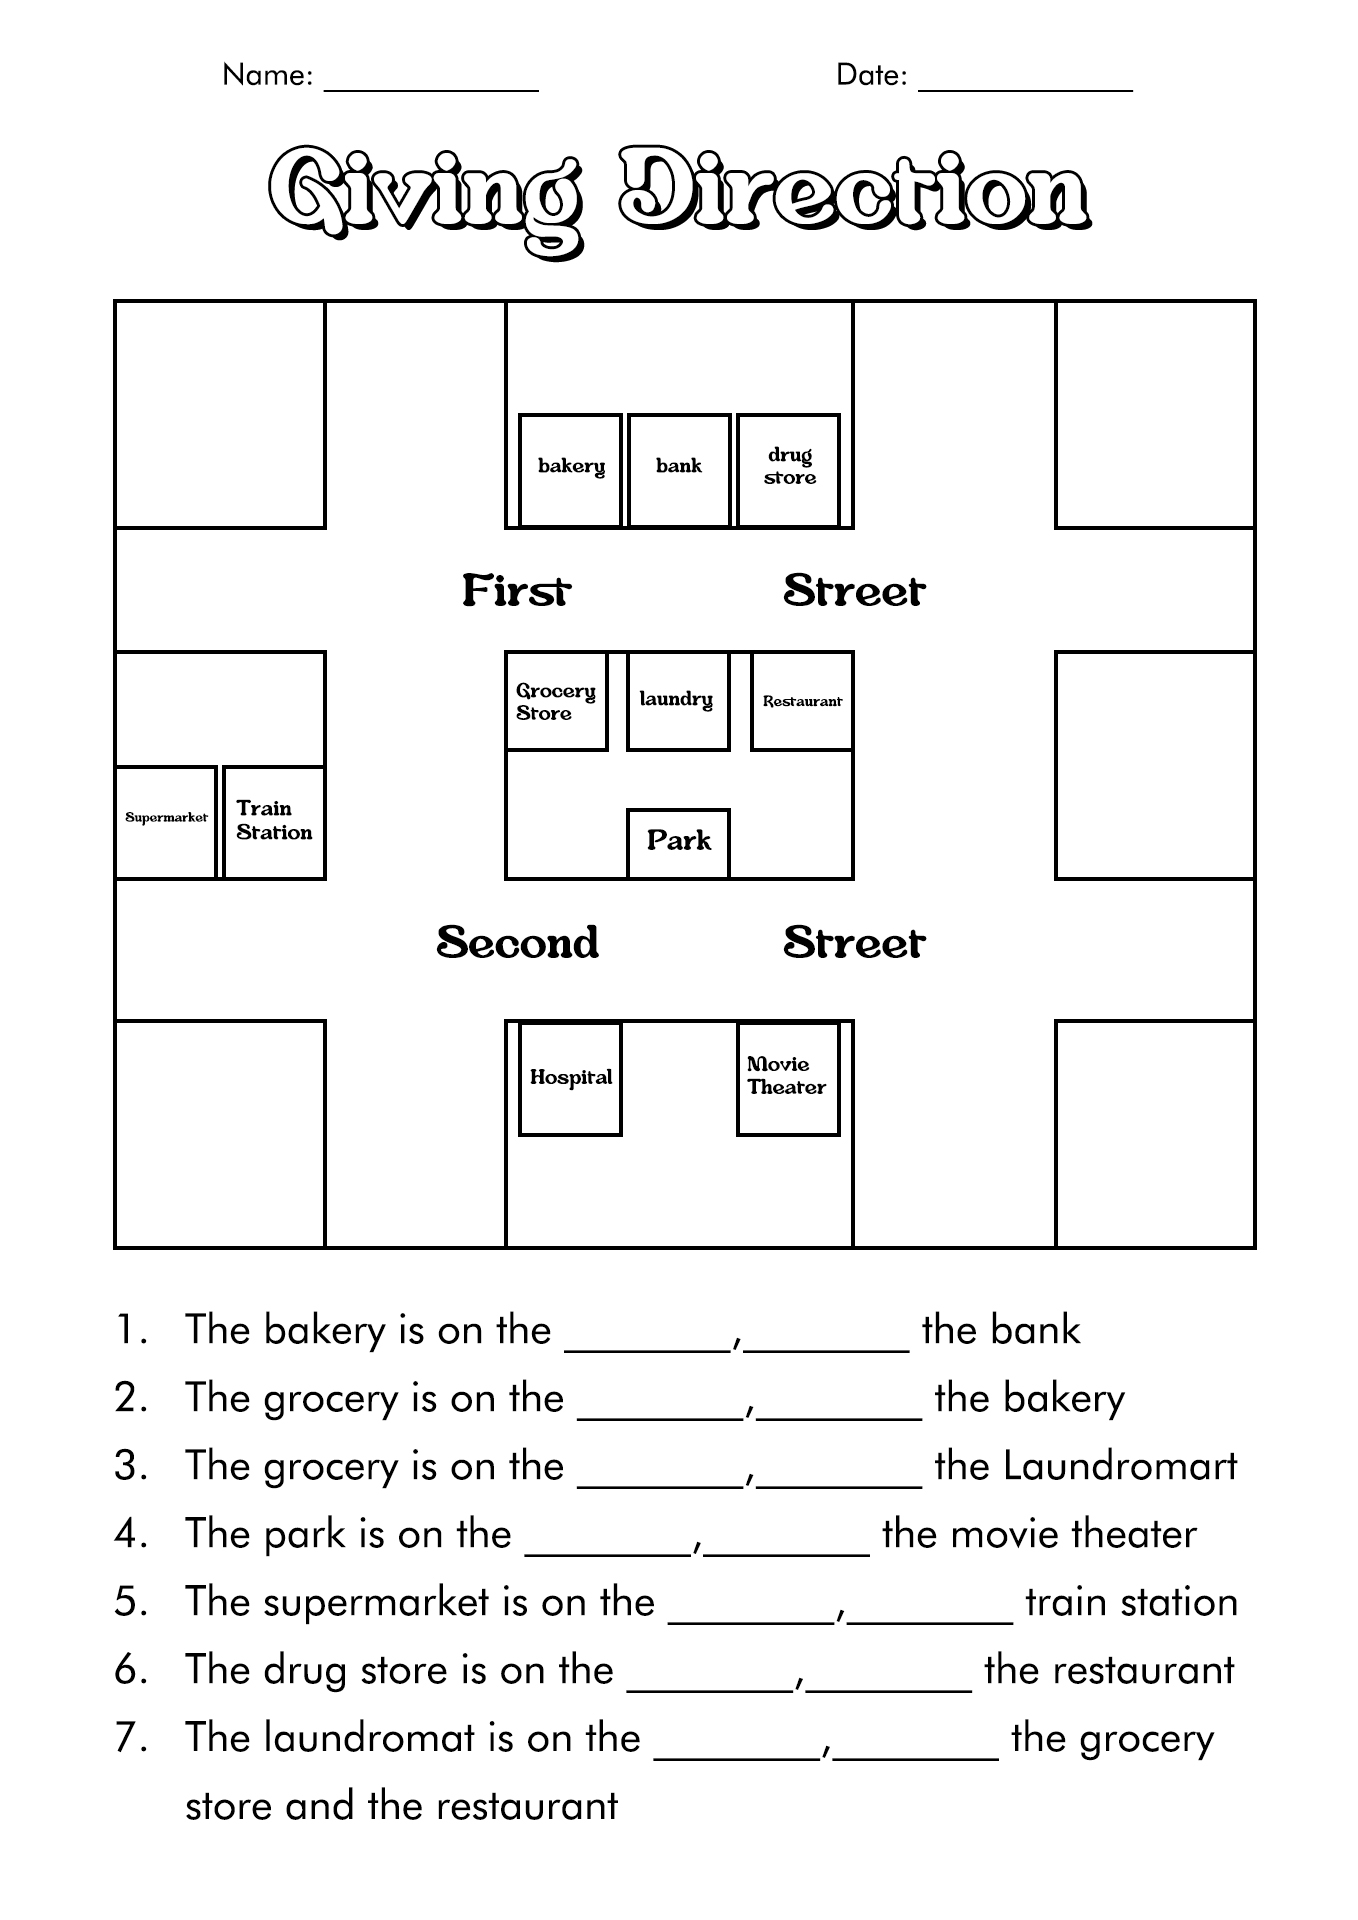 15-best-images-of-following-directions-first-grade-worksheets-ordinal